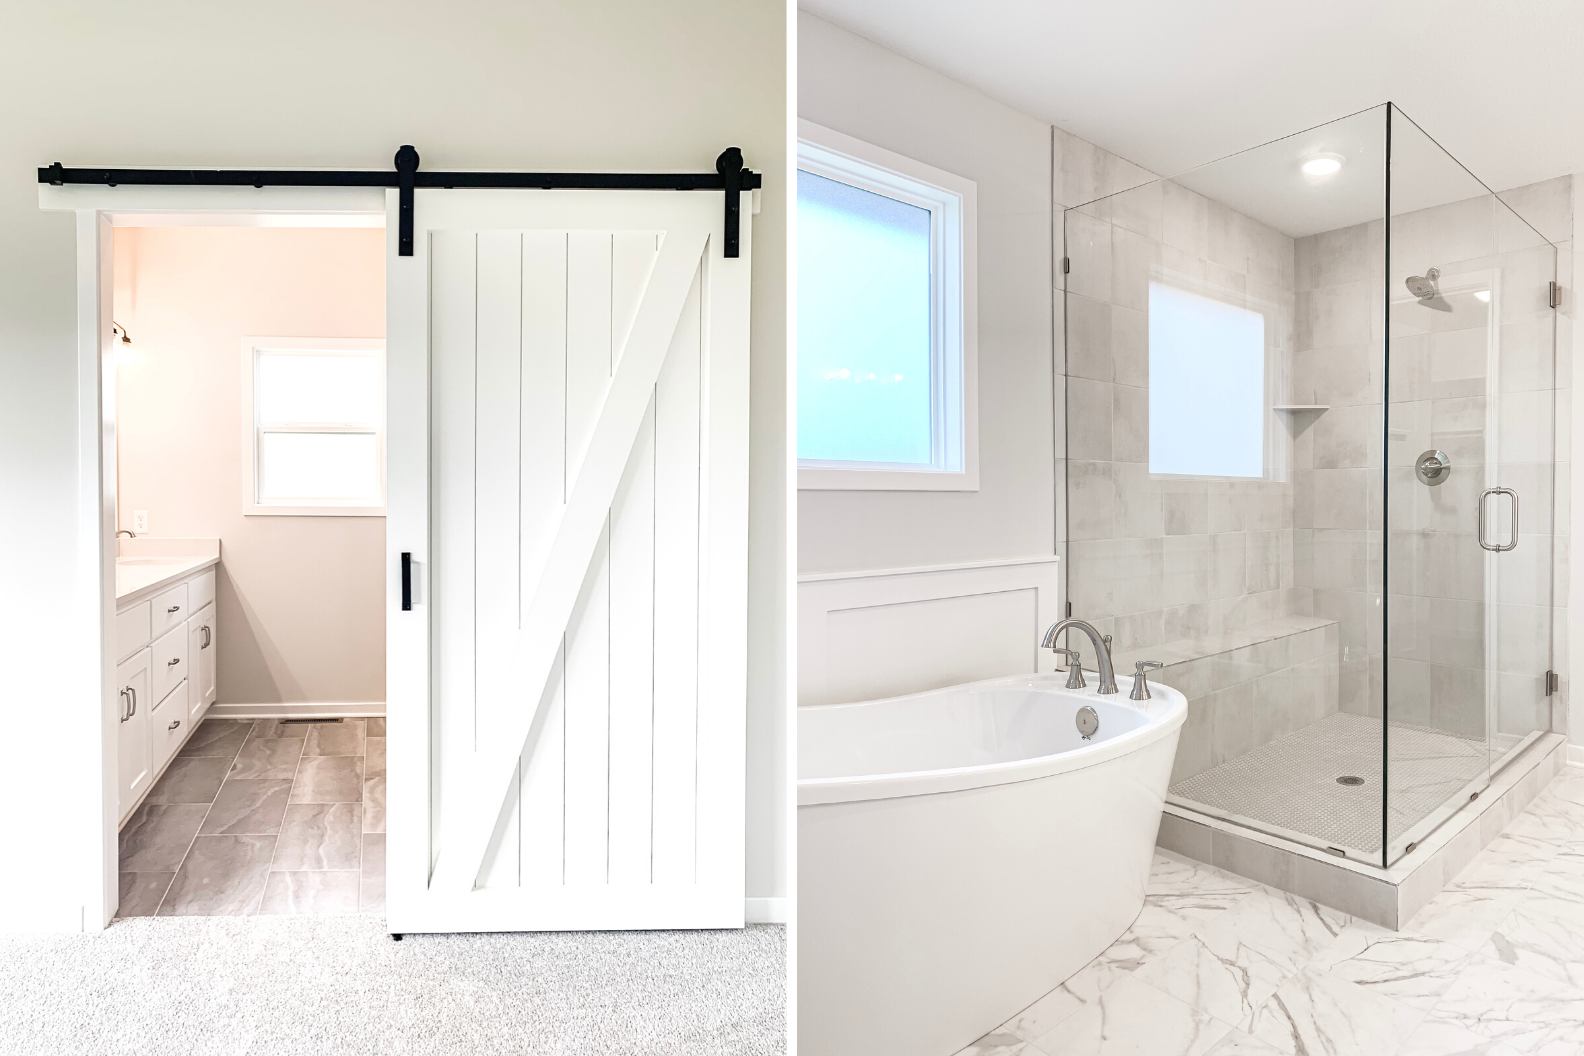 6 Master Bath Must-Haves - Everything Home Designs